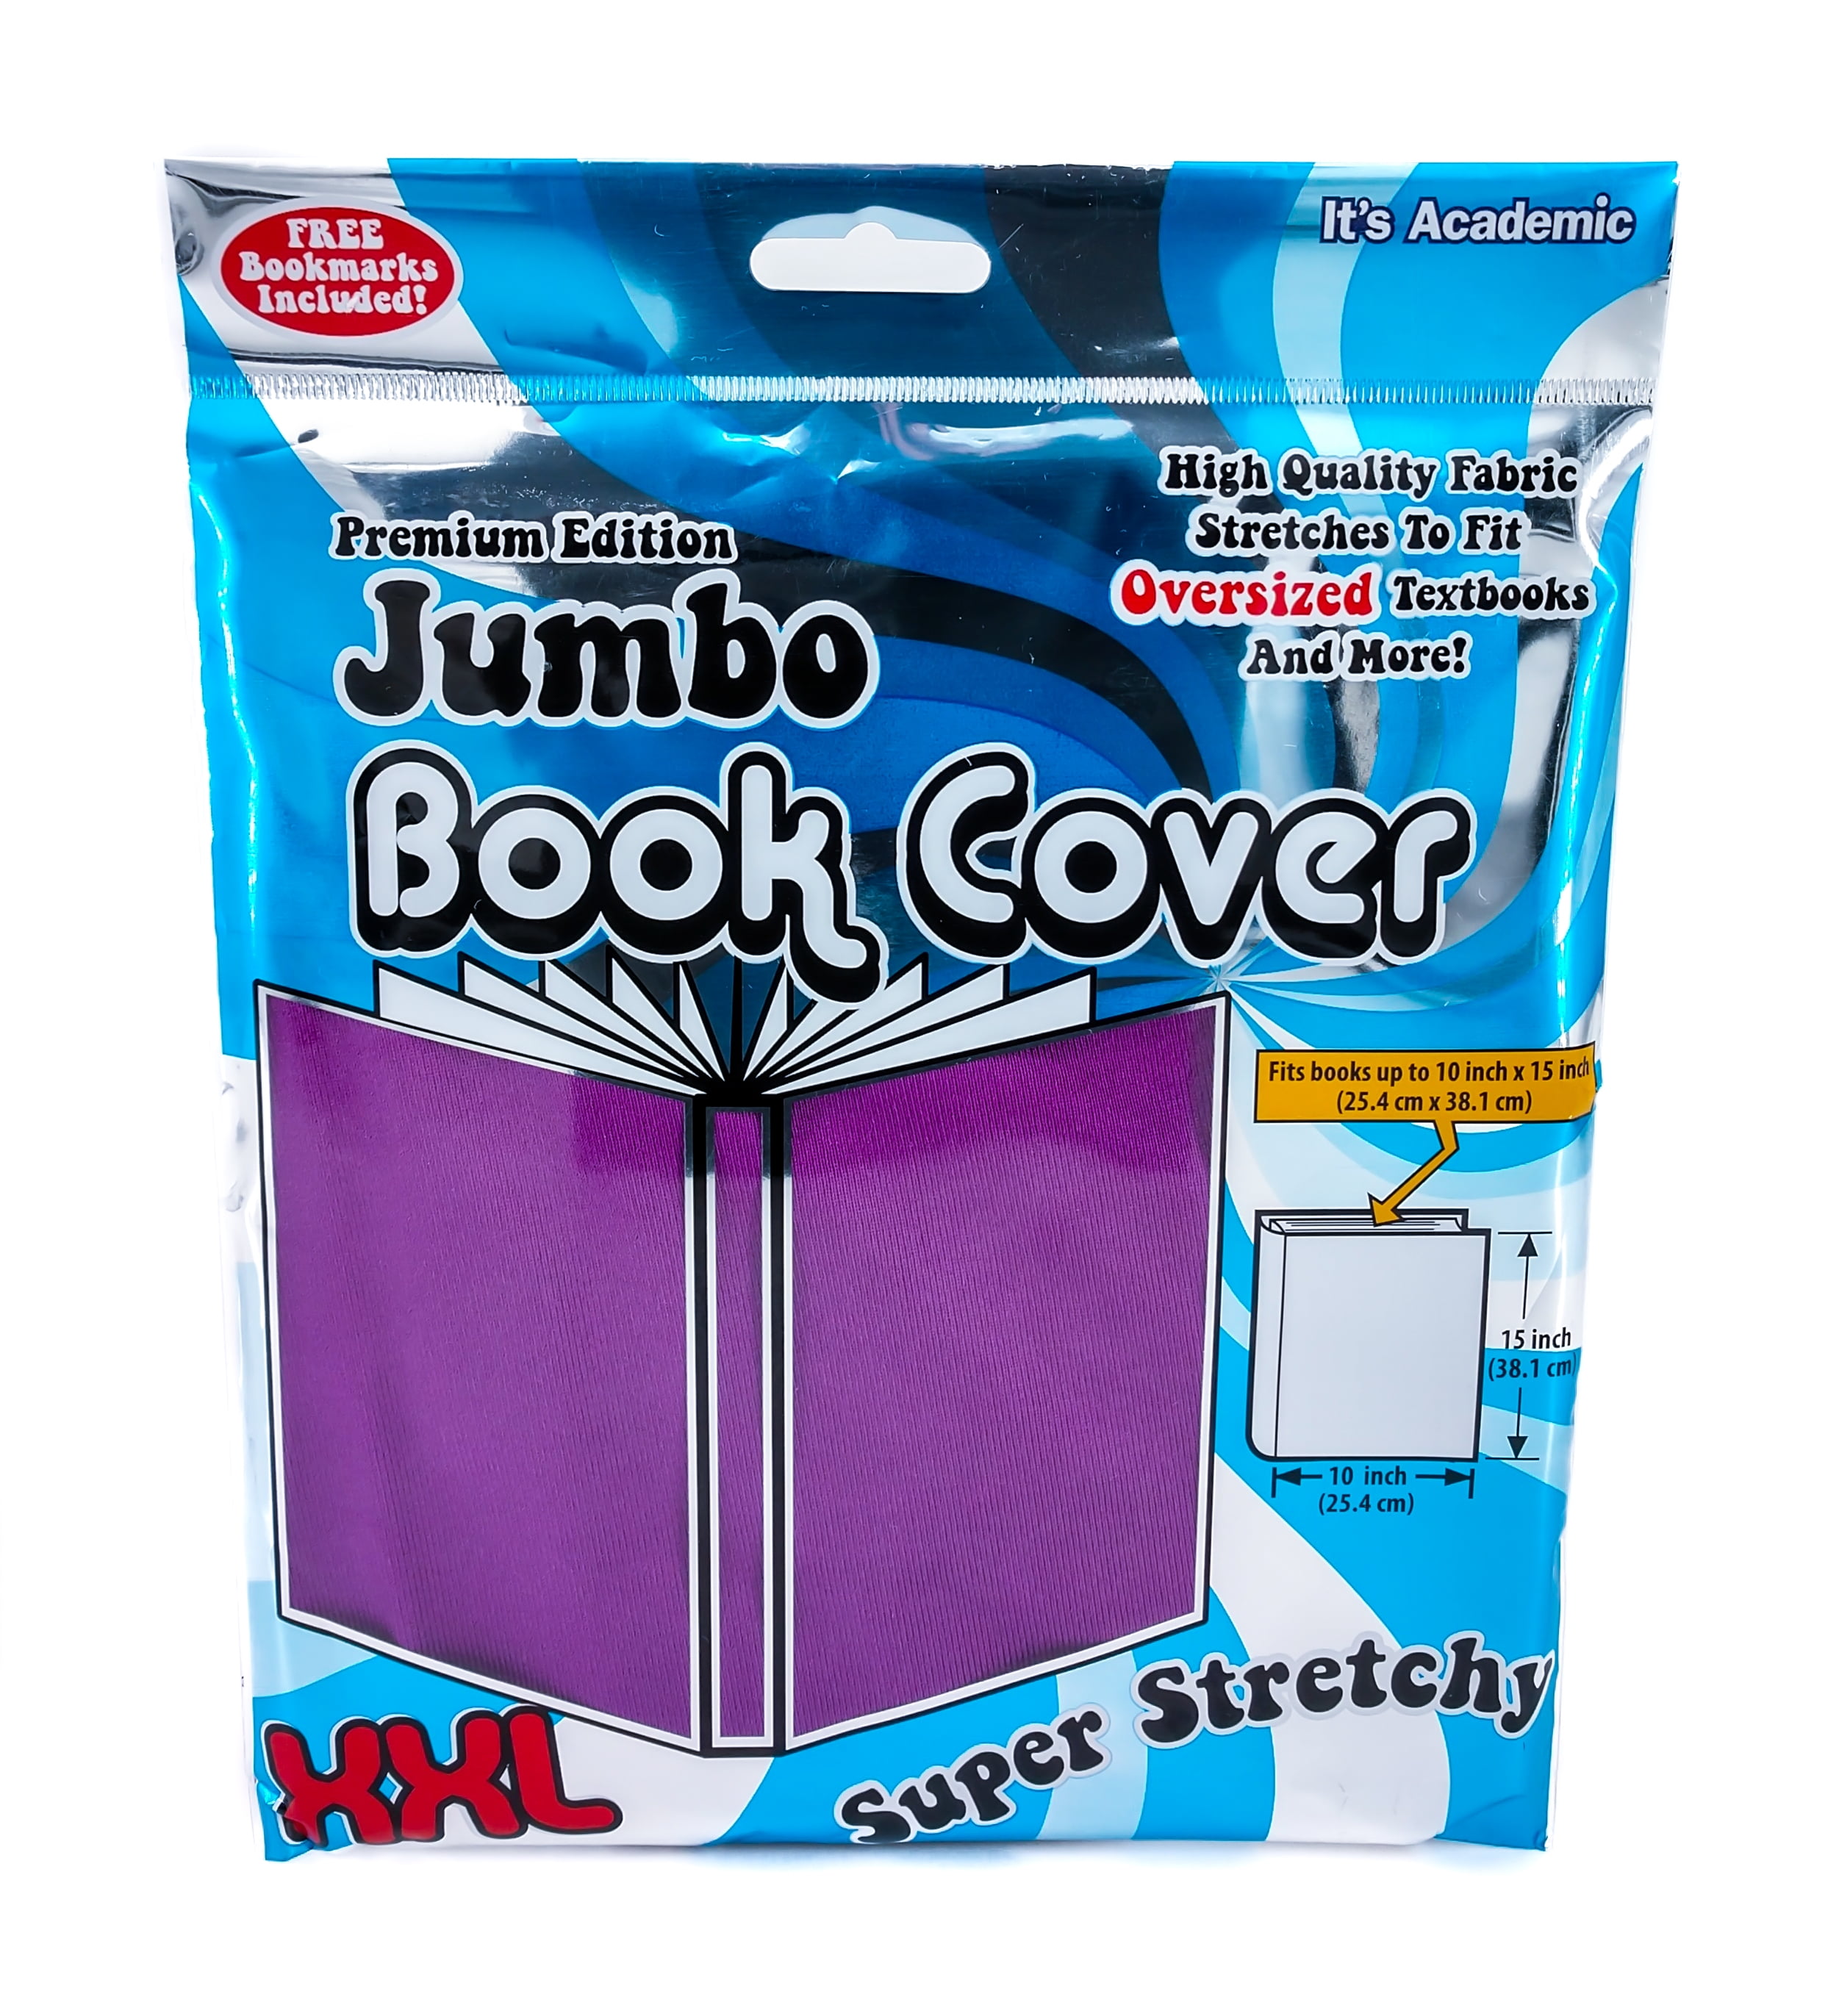 Jumbo Book Cover XXL 10 "x 15" Super Stretchy It's Academic Black Pink or Blue 